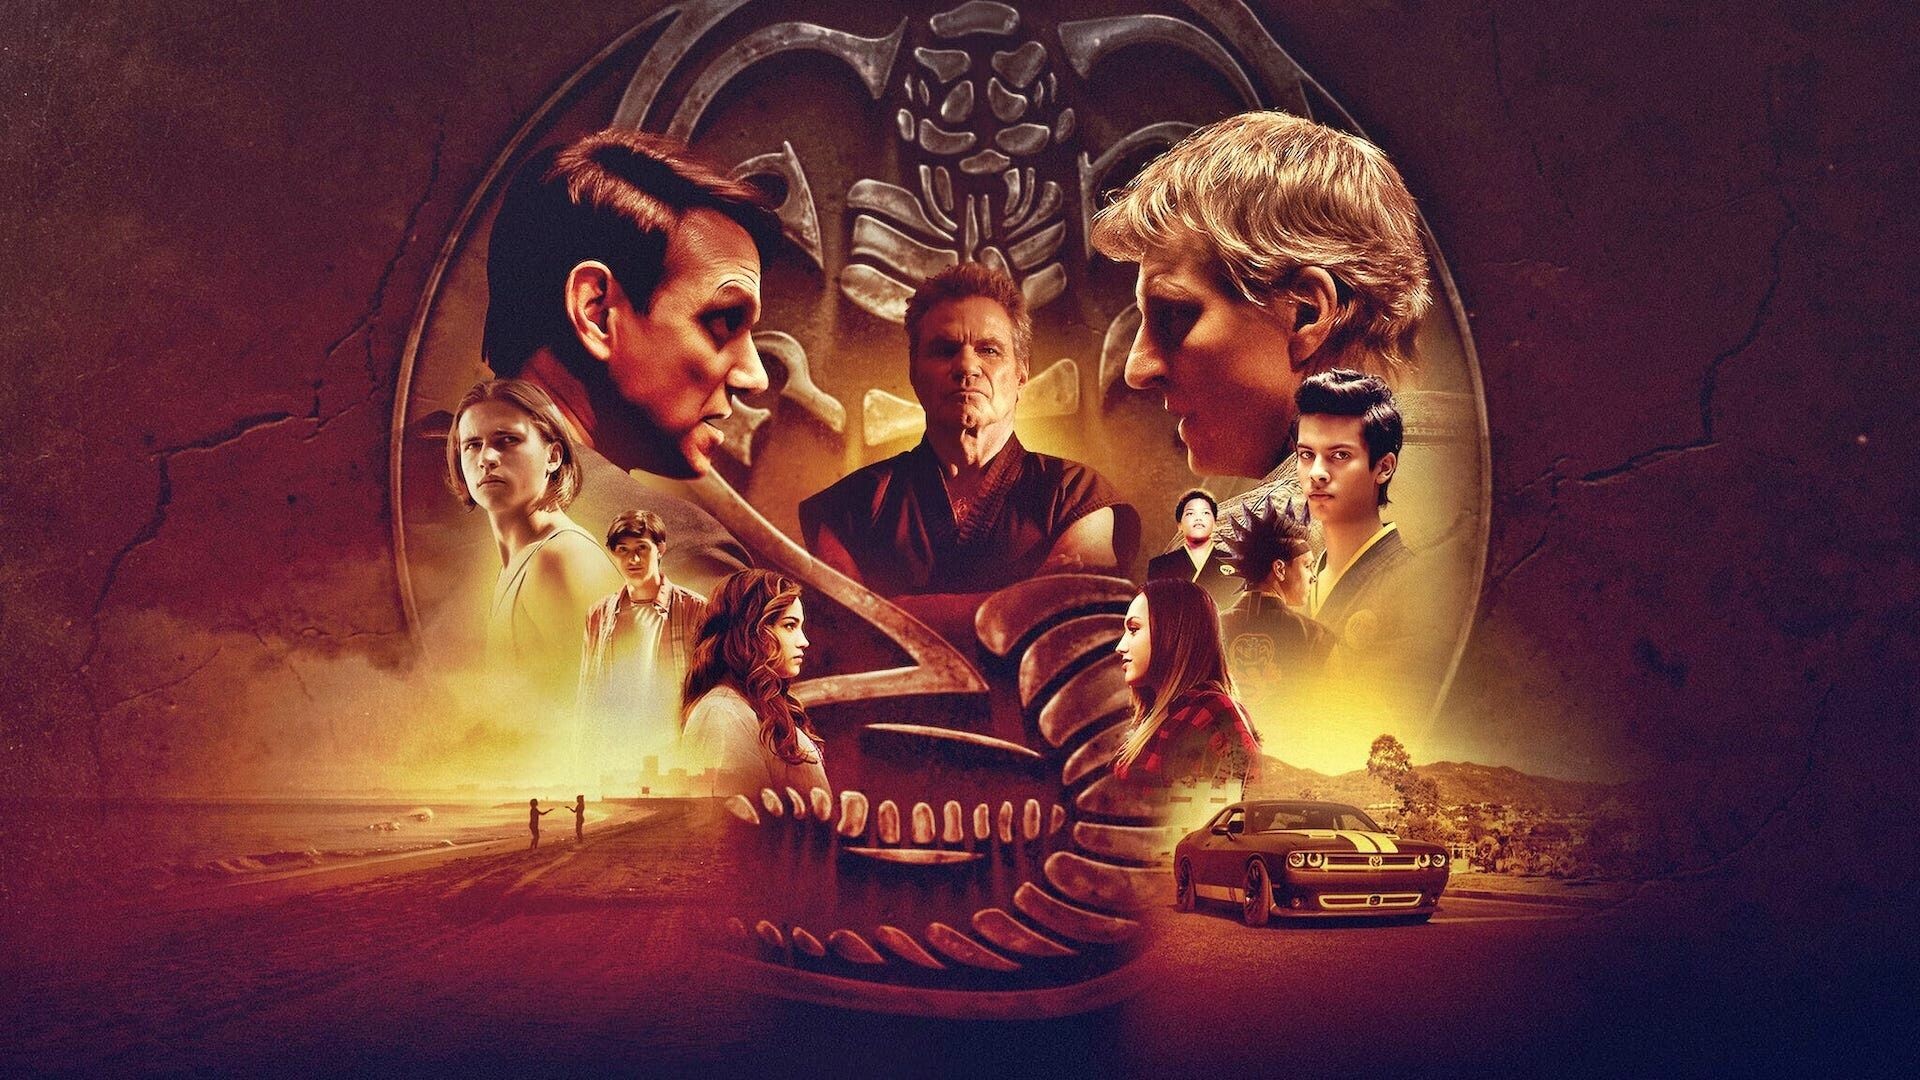 Cobra Kai (TV Series): Netflix renewed the series for a fourth season, which was released on December 31, 2021. 1920x1080 Full HD Background.